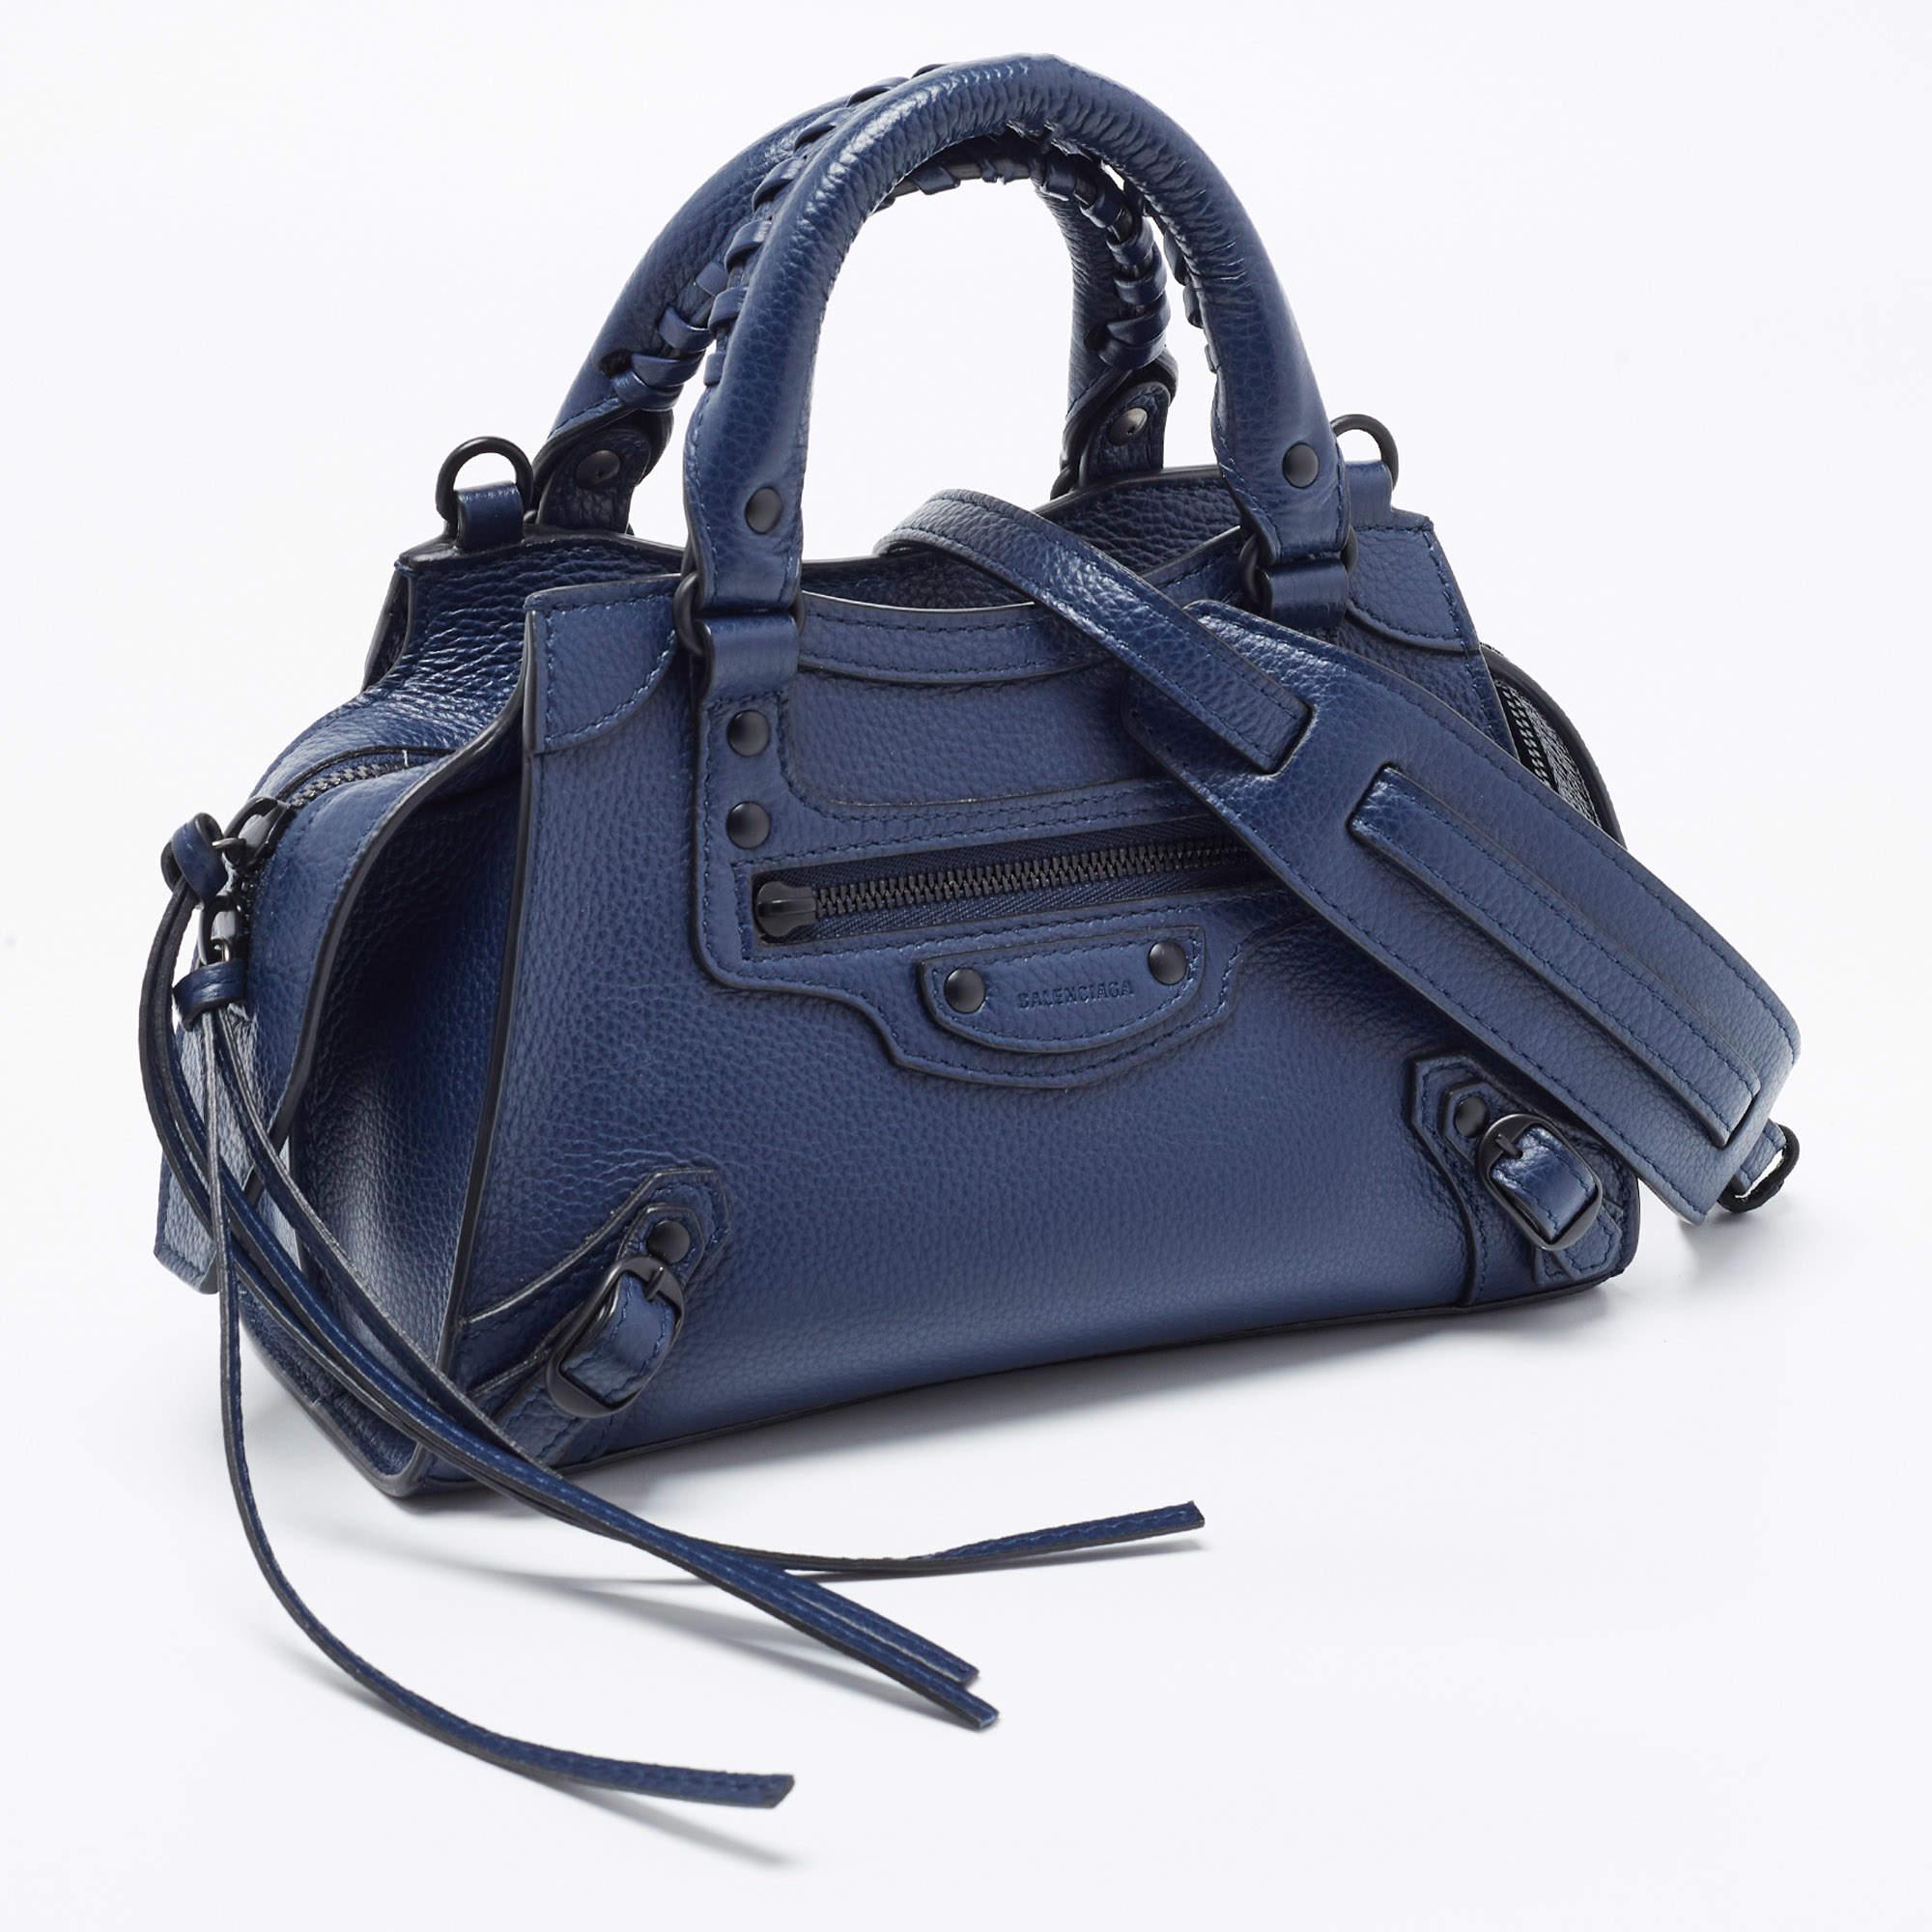 The Balenciaga City tote is a compact yet stylish handbag crafted from premium dark blue leather. It features the iconic Neo Classic design with black-tone hardware, a top zip closure, and a detachable shoulder strap, making it a versatile and